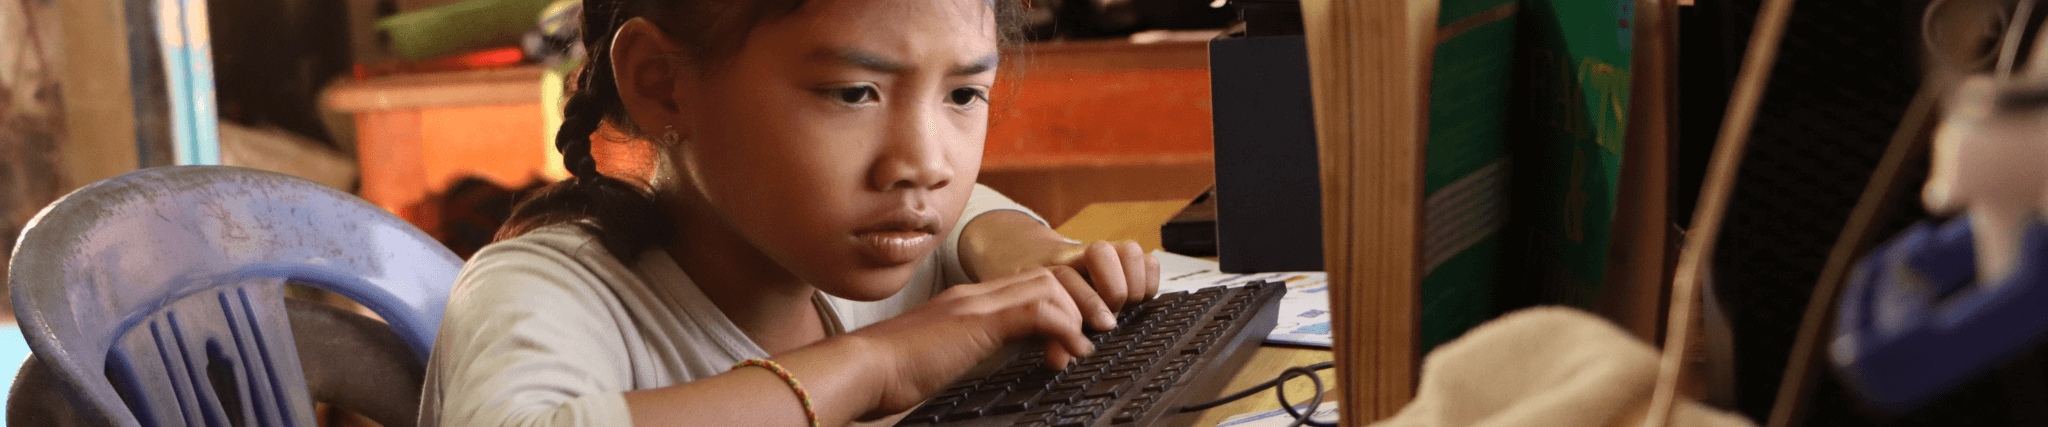 reasons why kids should learn coding